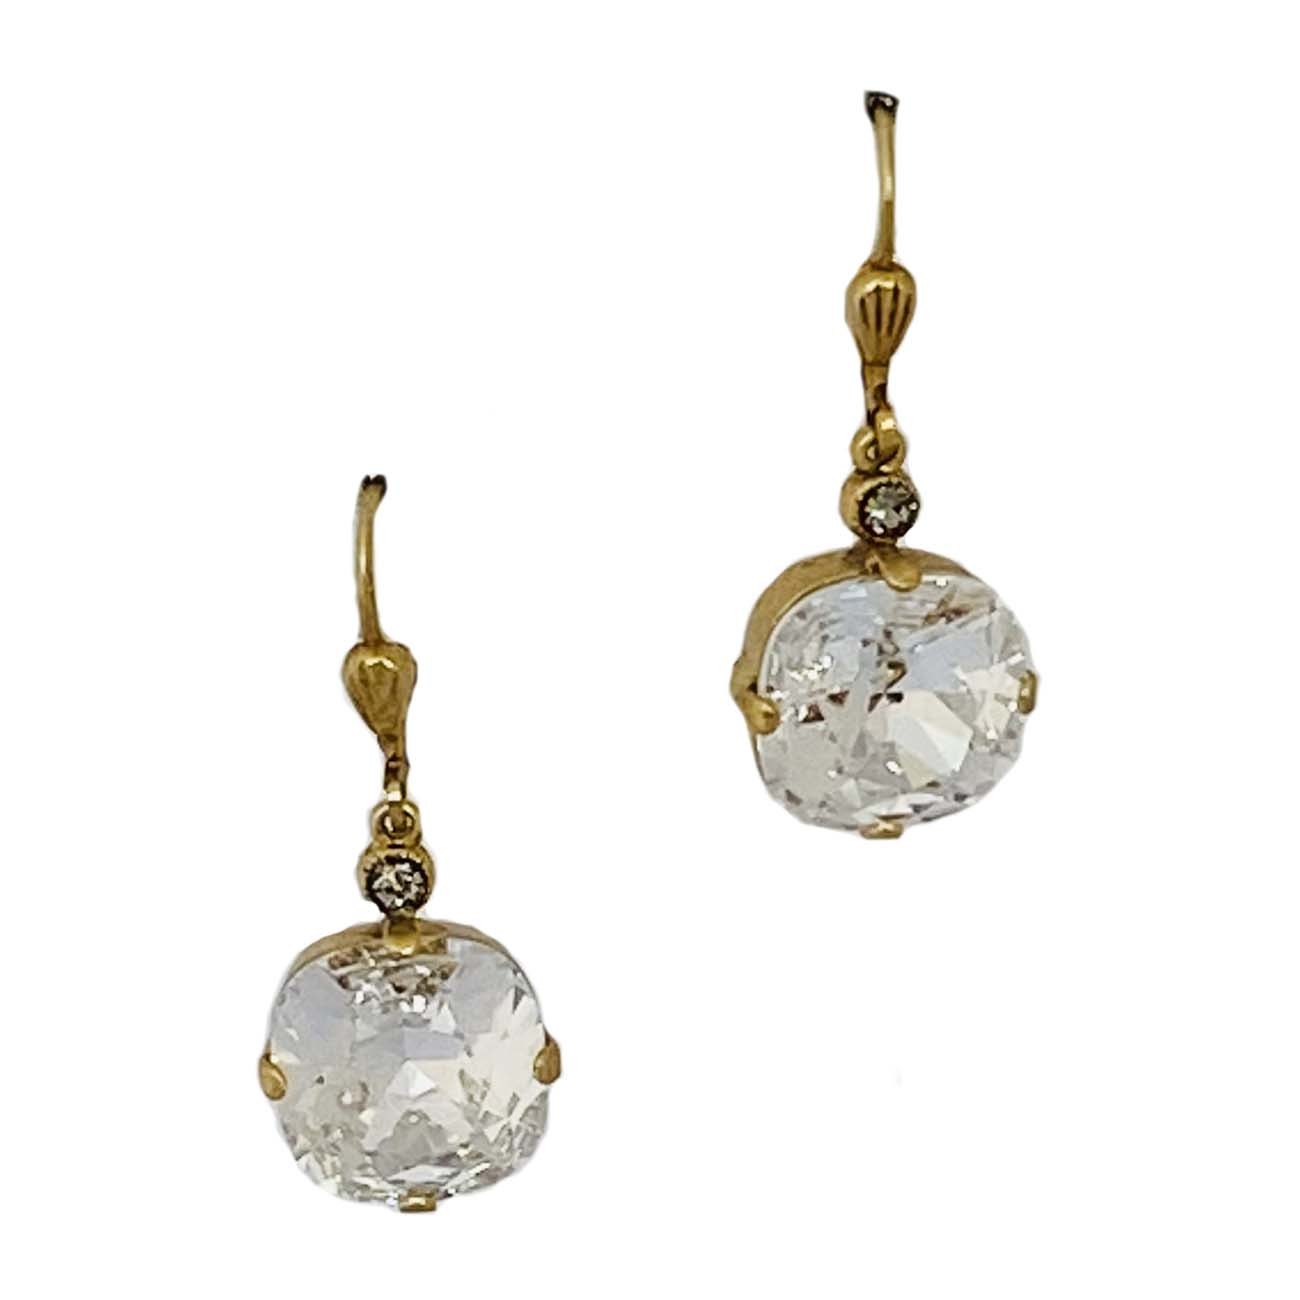 Ice clear crystal old glass drop earrings gold plated lever back